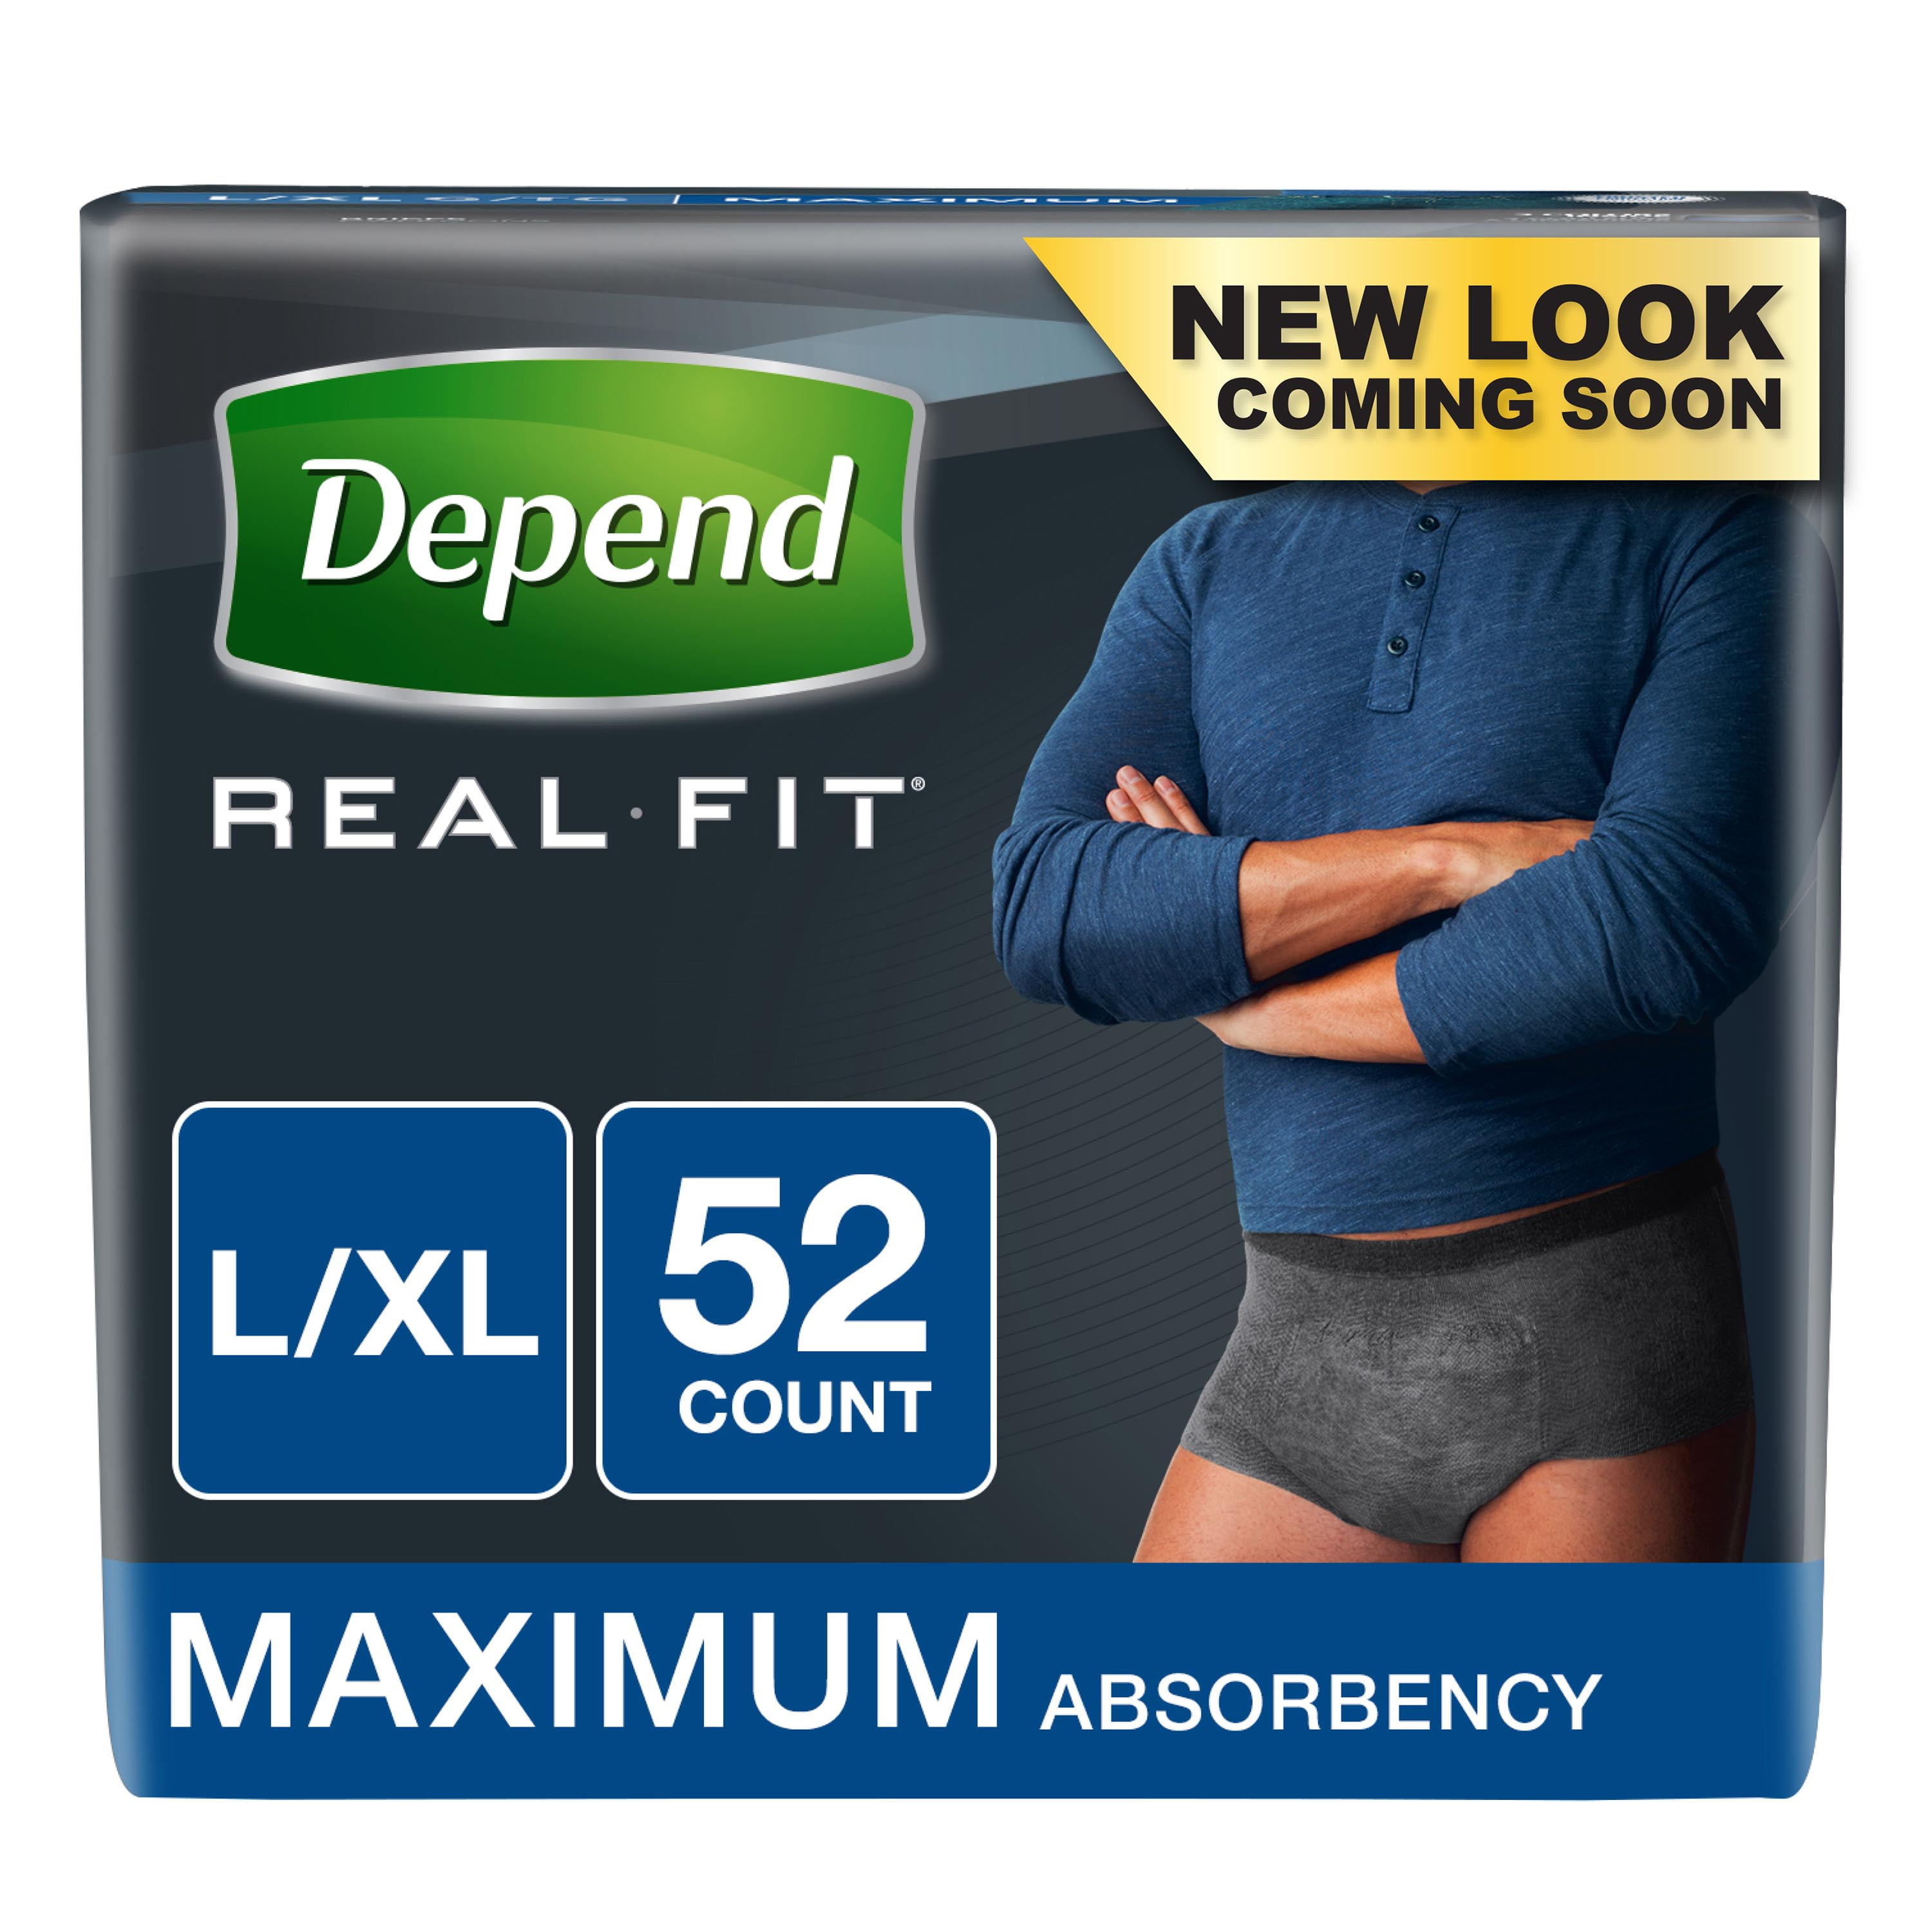 Depend Real Fit Incontinence Briefs for Men, Maximum Absorbency, L/XL ...